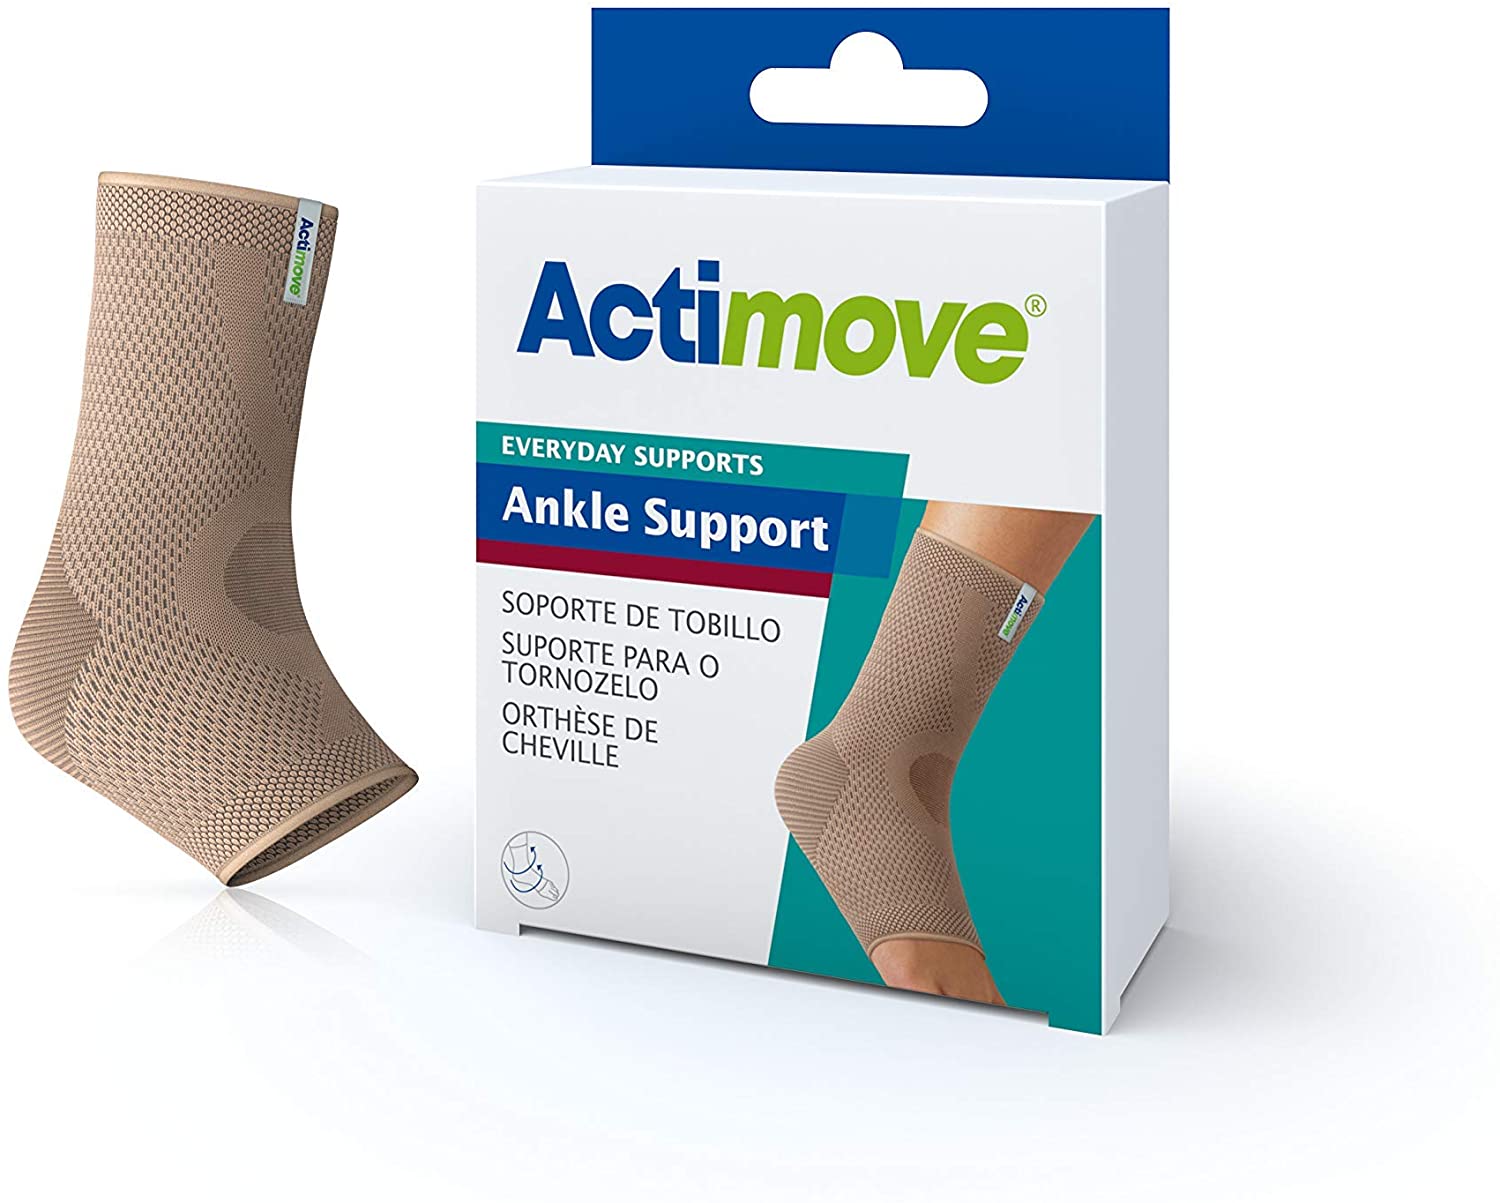 Actimove Arthritis Pain Relief Support, Ankle, Xl, Beige - Ea/1